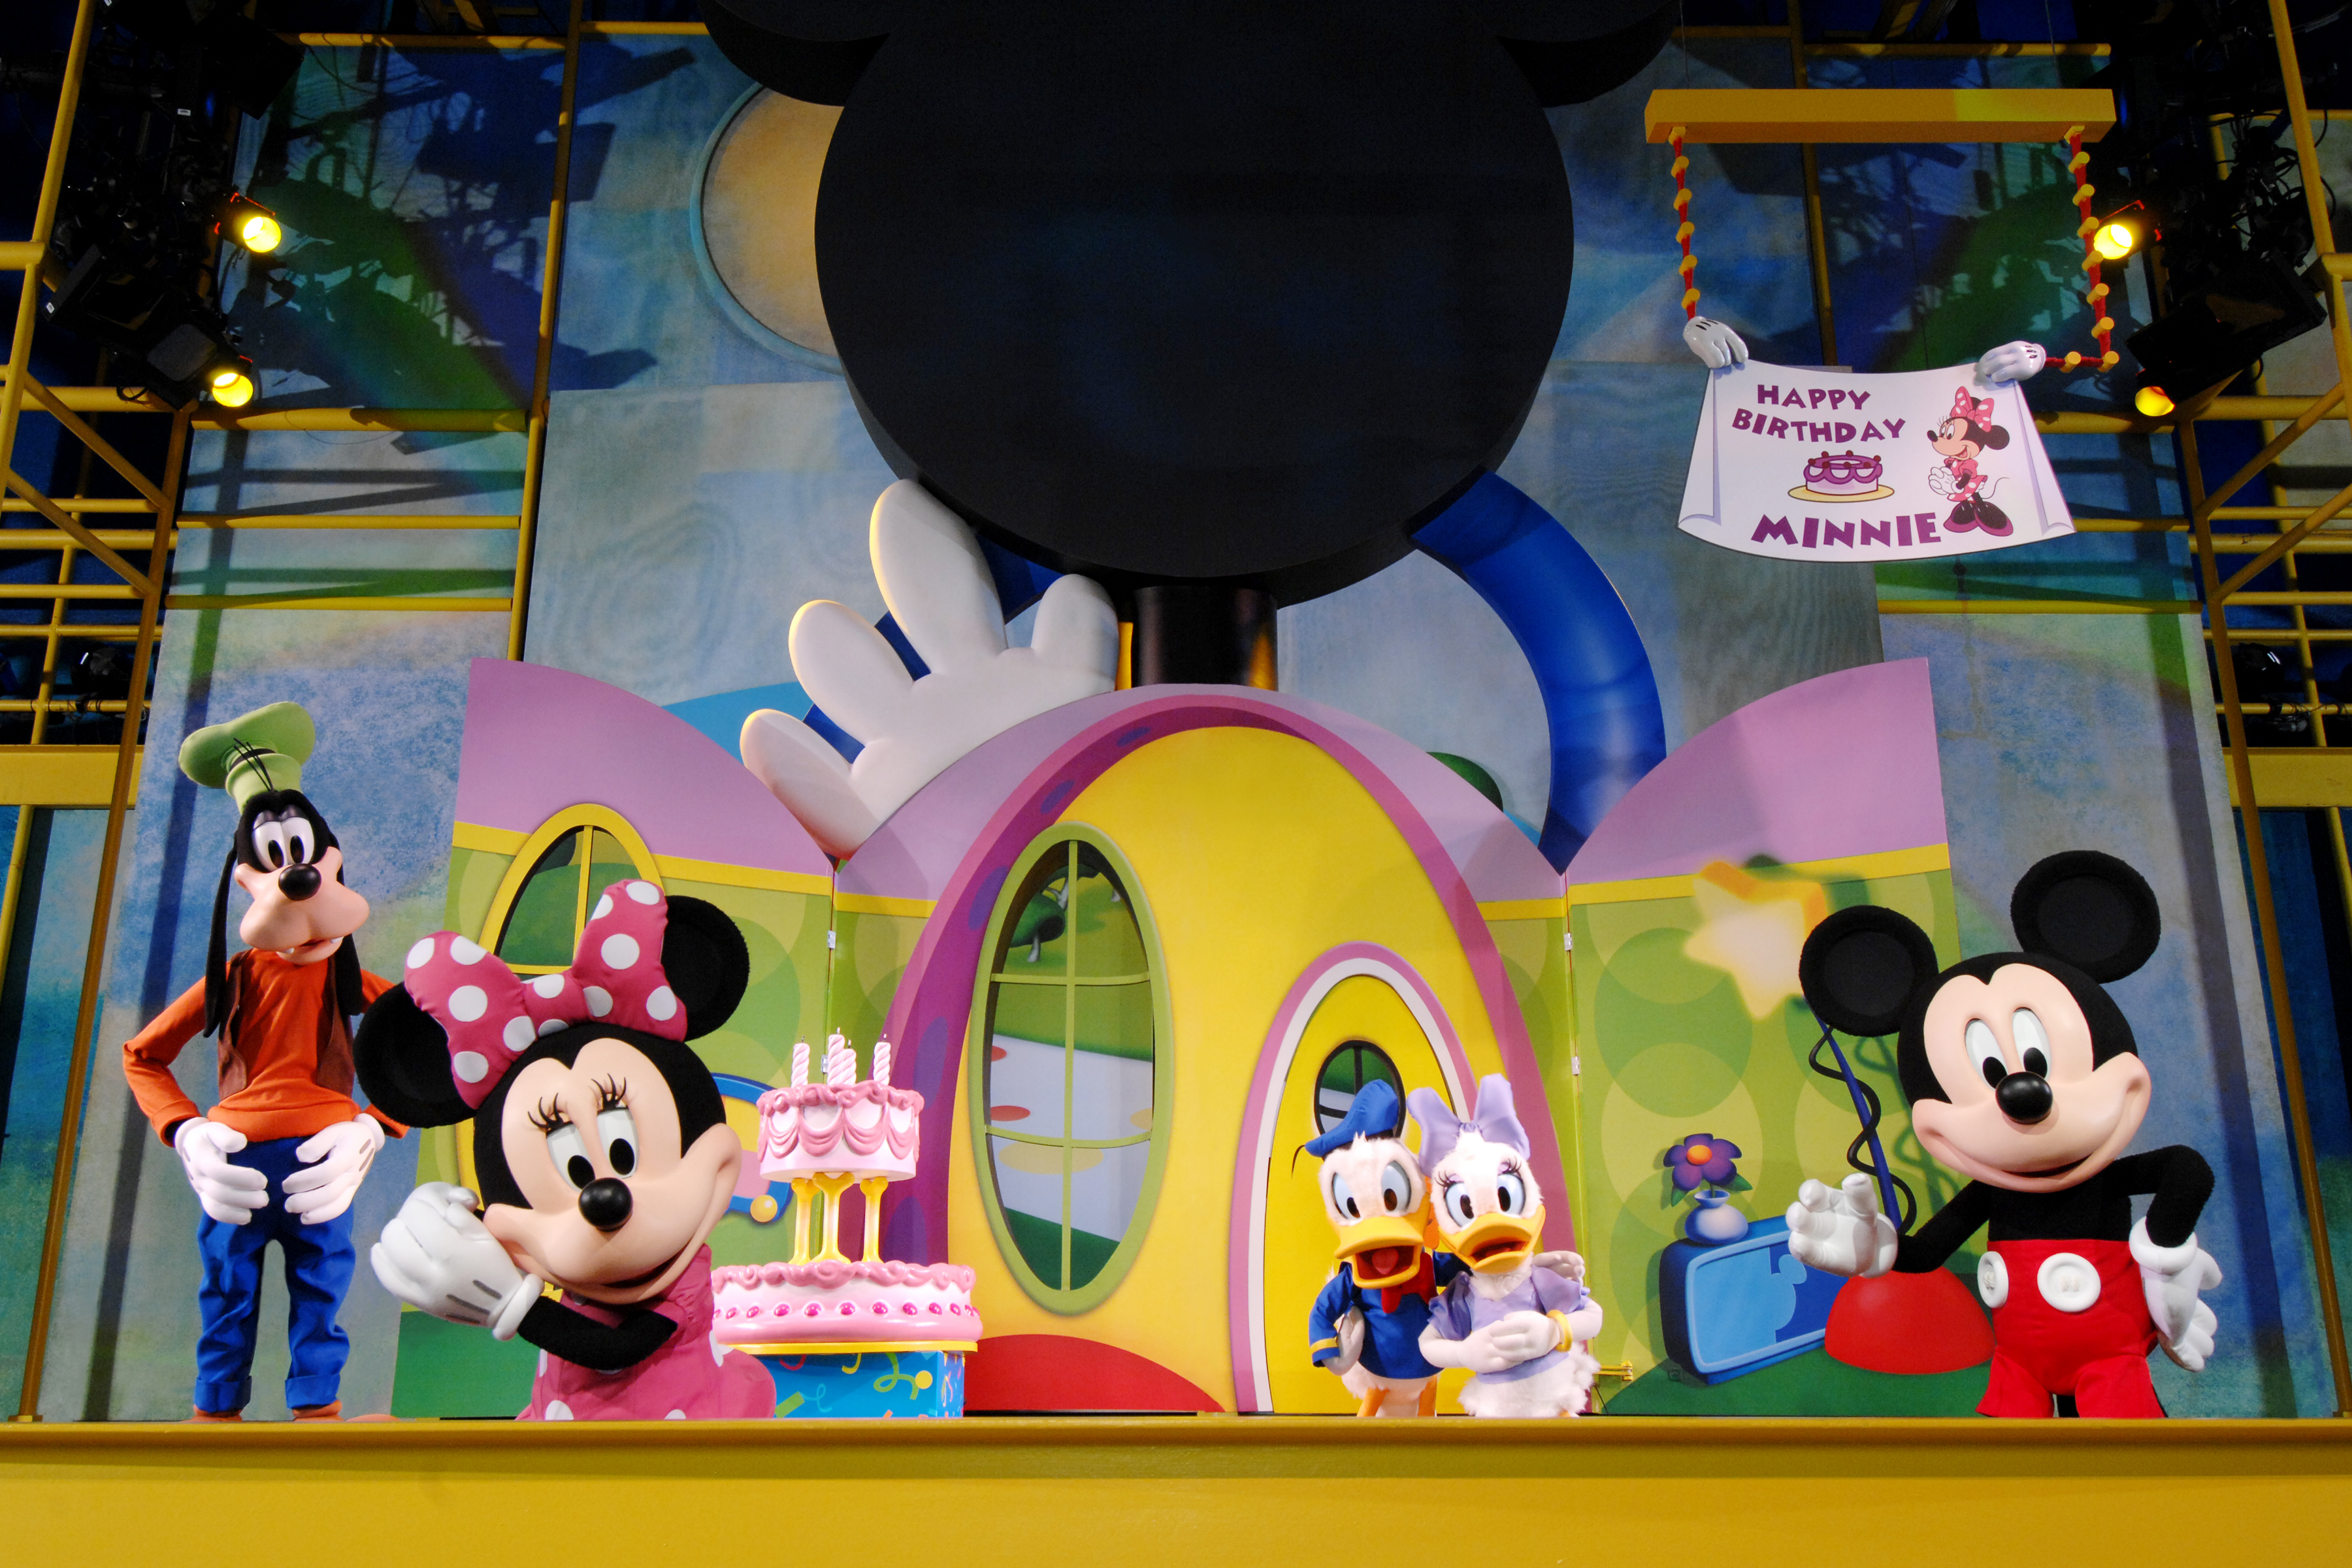 Disney Junior Mickey Mouse Clubhouse